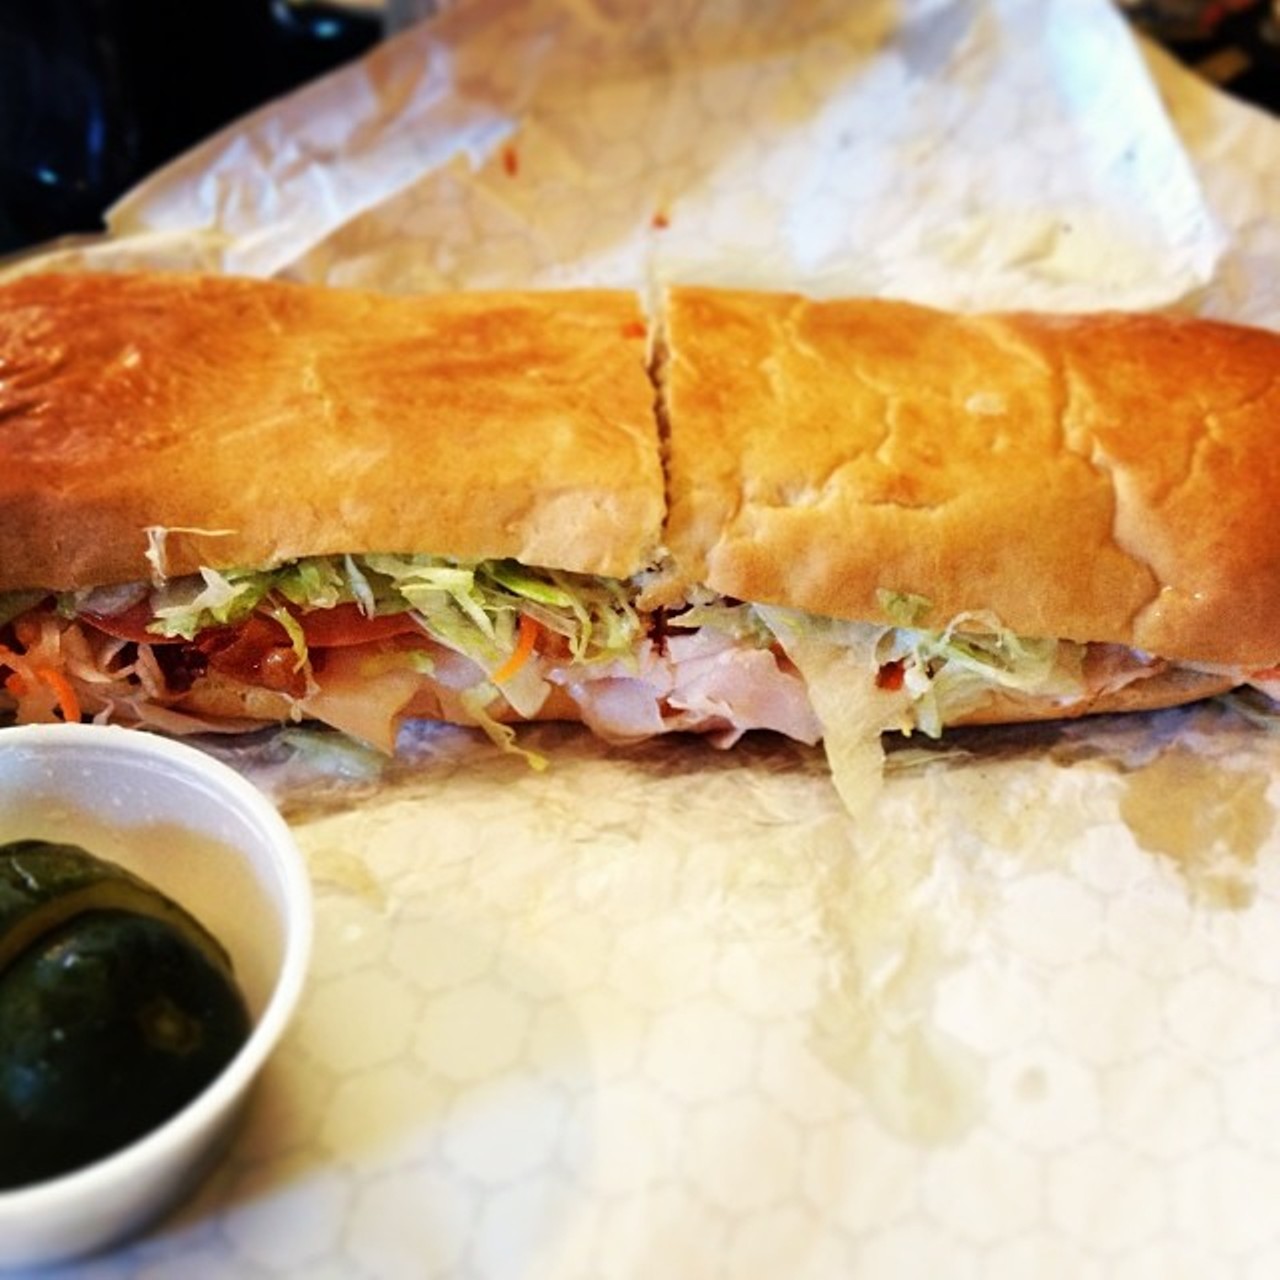 The Classic Pickle is the Italian hoagie of one’s dreams. This perfectly balanced and assembled sub has just the right amounts of capicola, sopressata, prosciutto, provolone, and a spicy pickle relish to boot. 
850 Euclid Ave., 216-575-1111, www.clevelandpickle.com